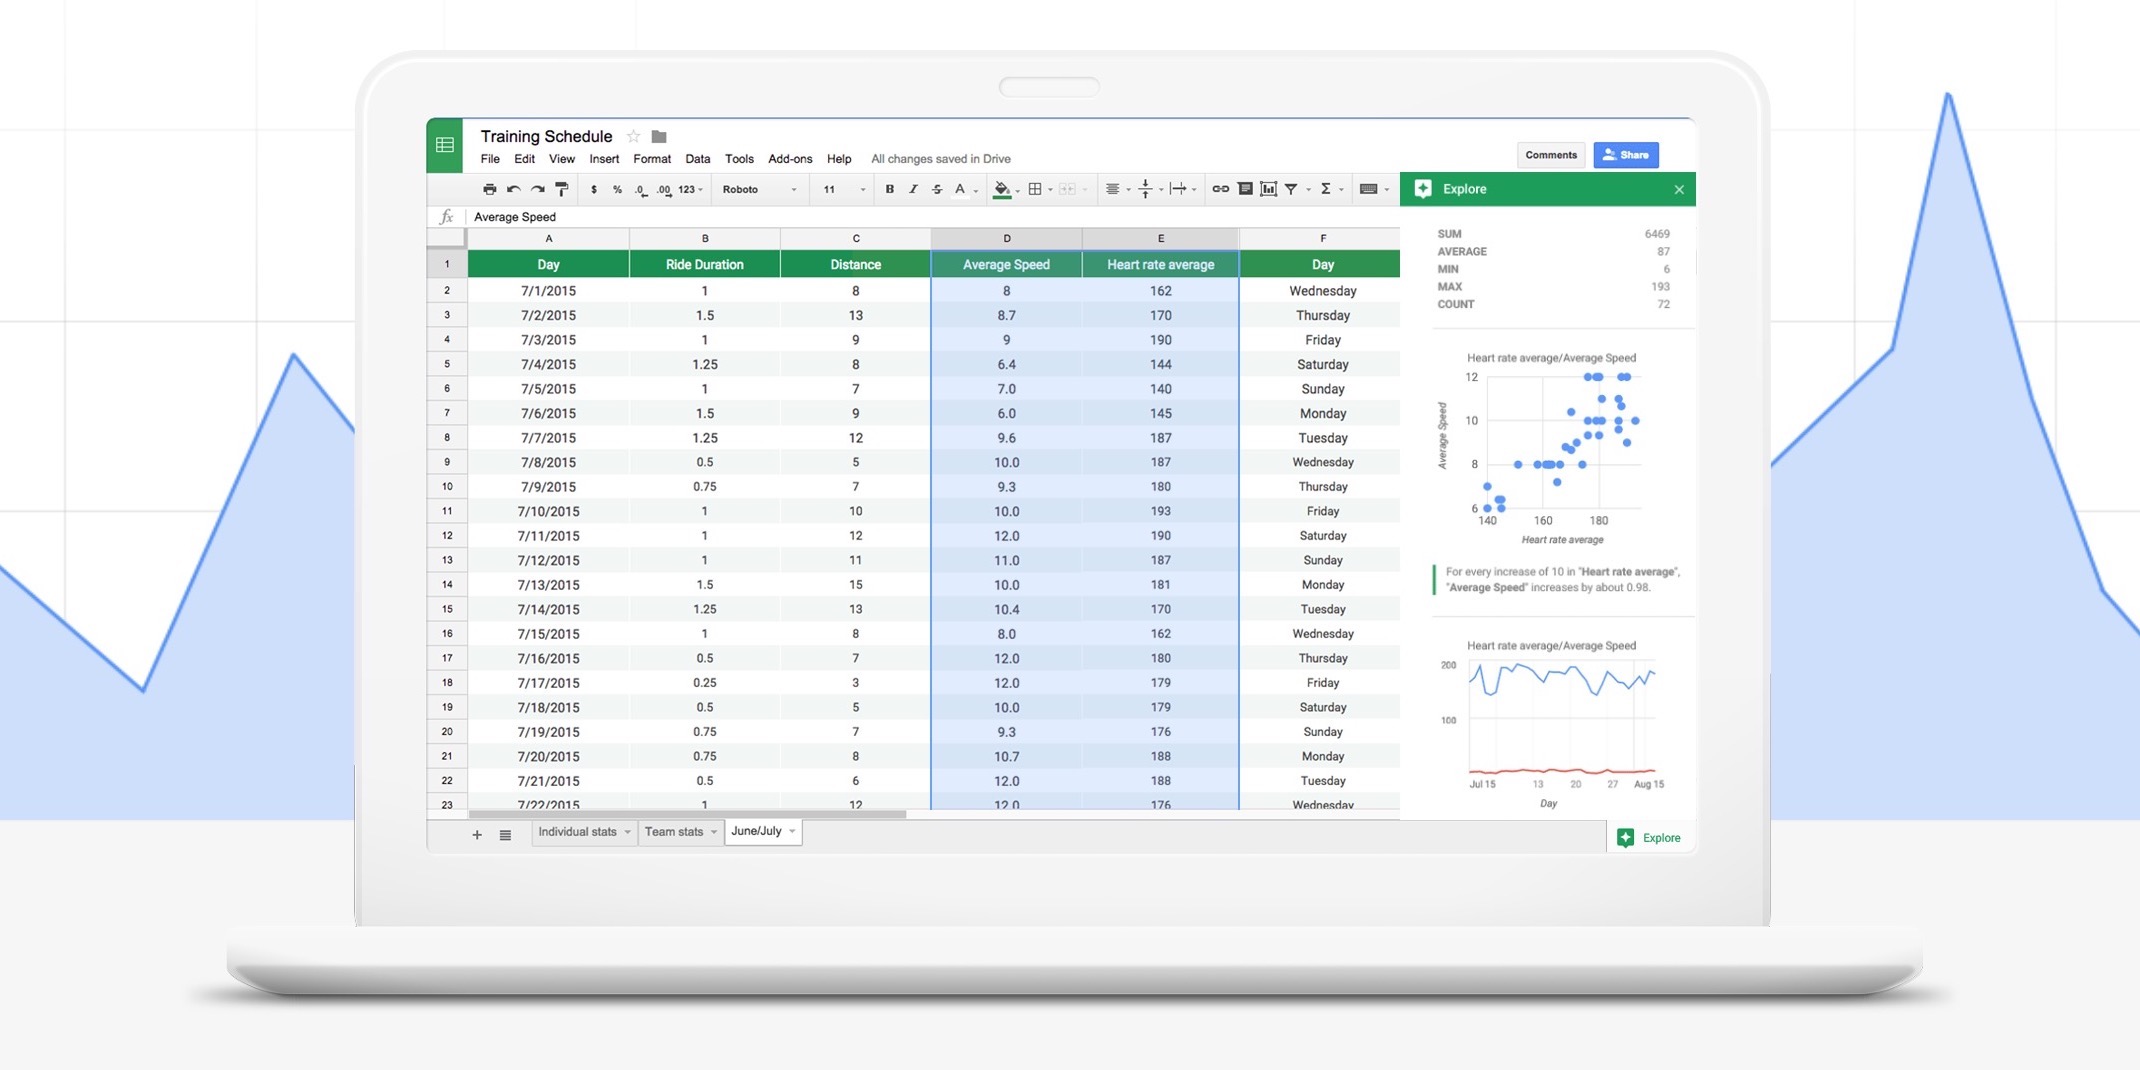 google sheets download for windows 10